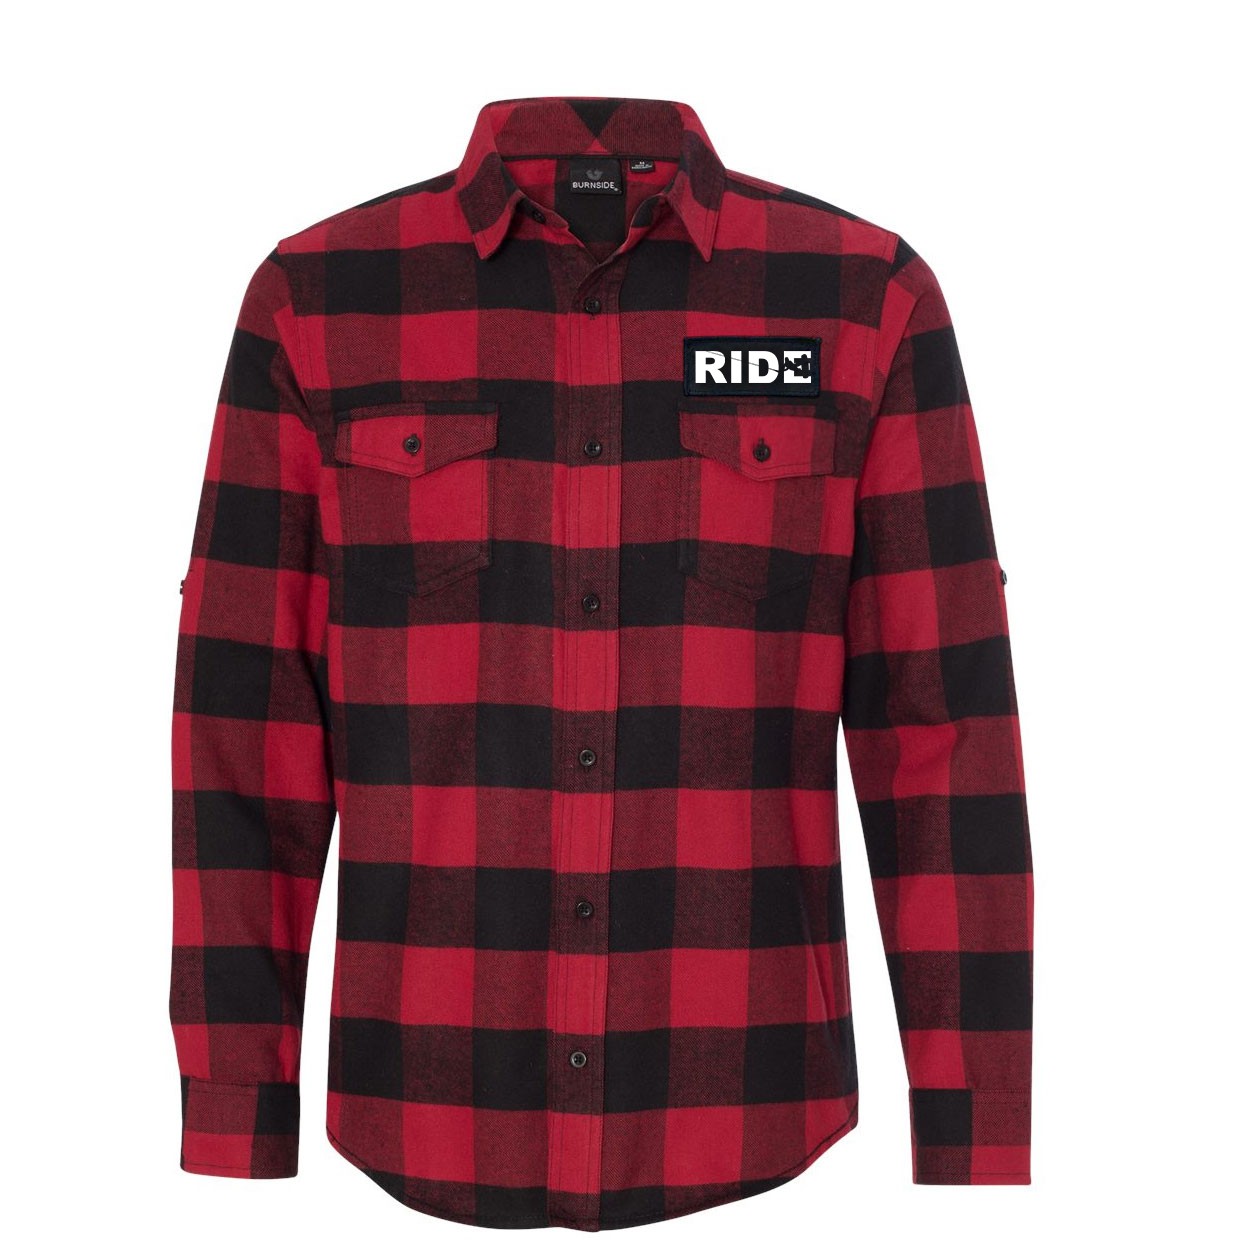 Ride Wakeboard Logo Classic Unisex Long Sleeve Woven Patch Flannel Shirt Red/Black Buffalo (White Logo)